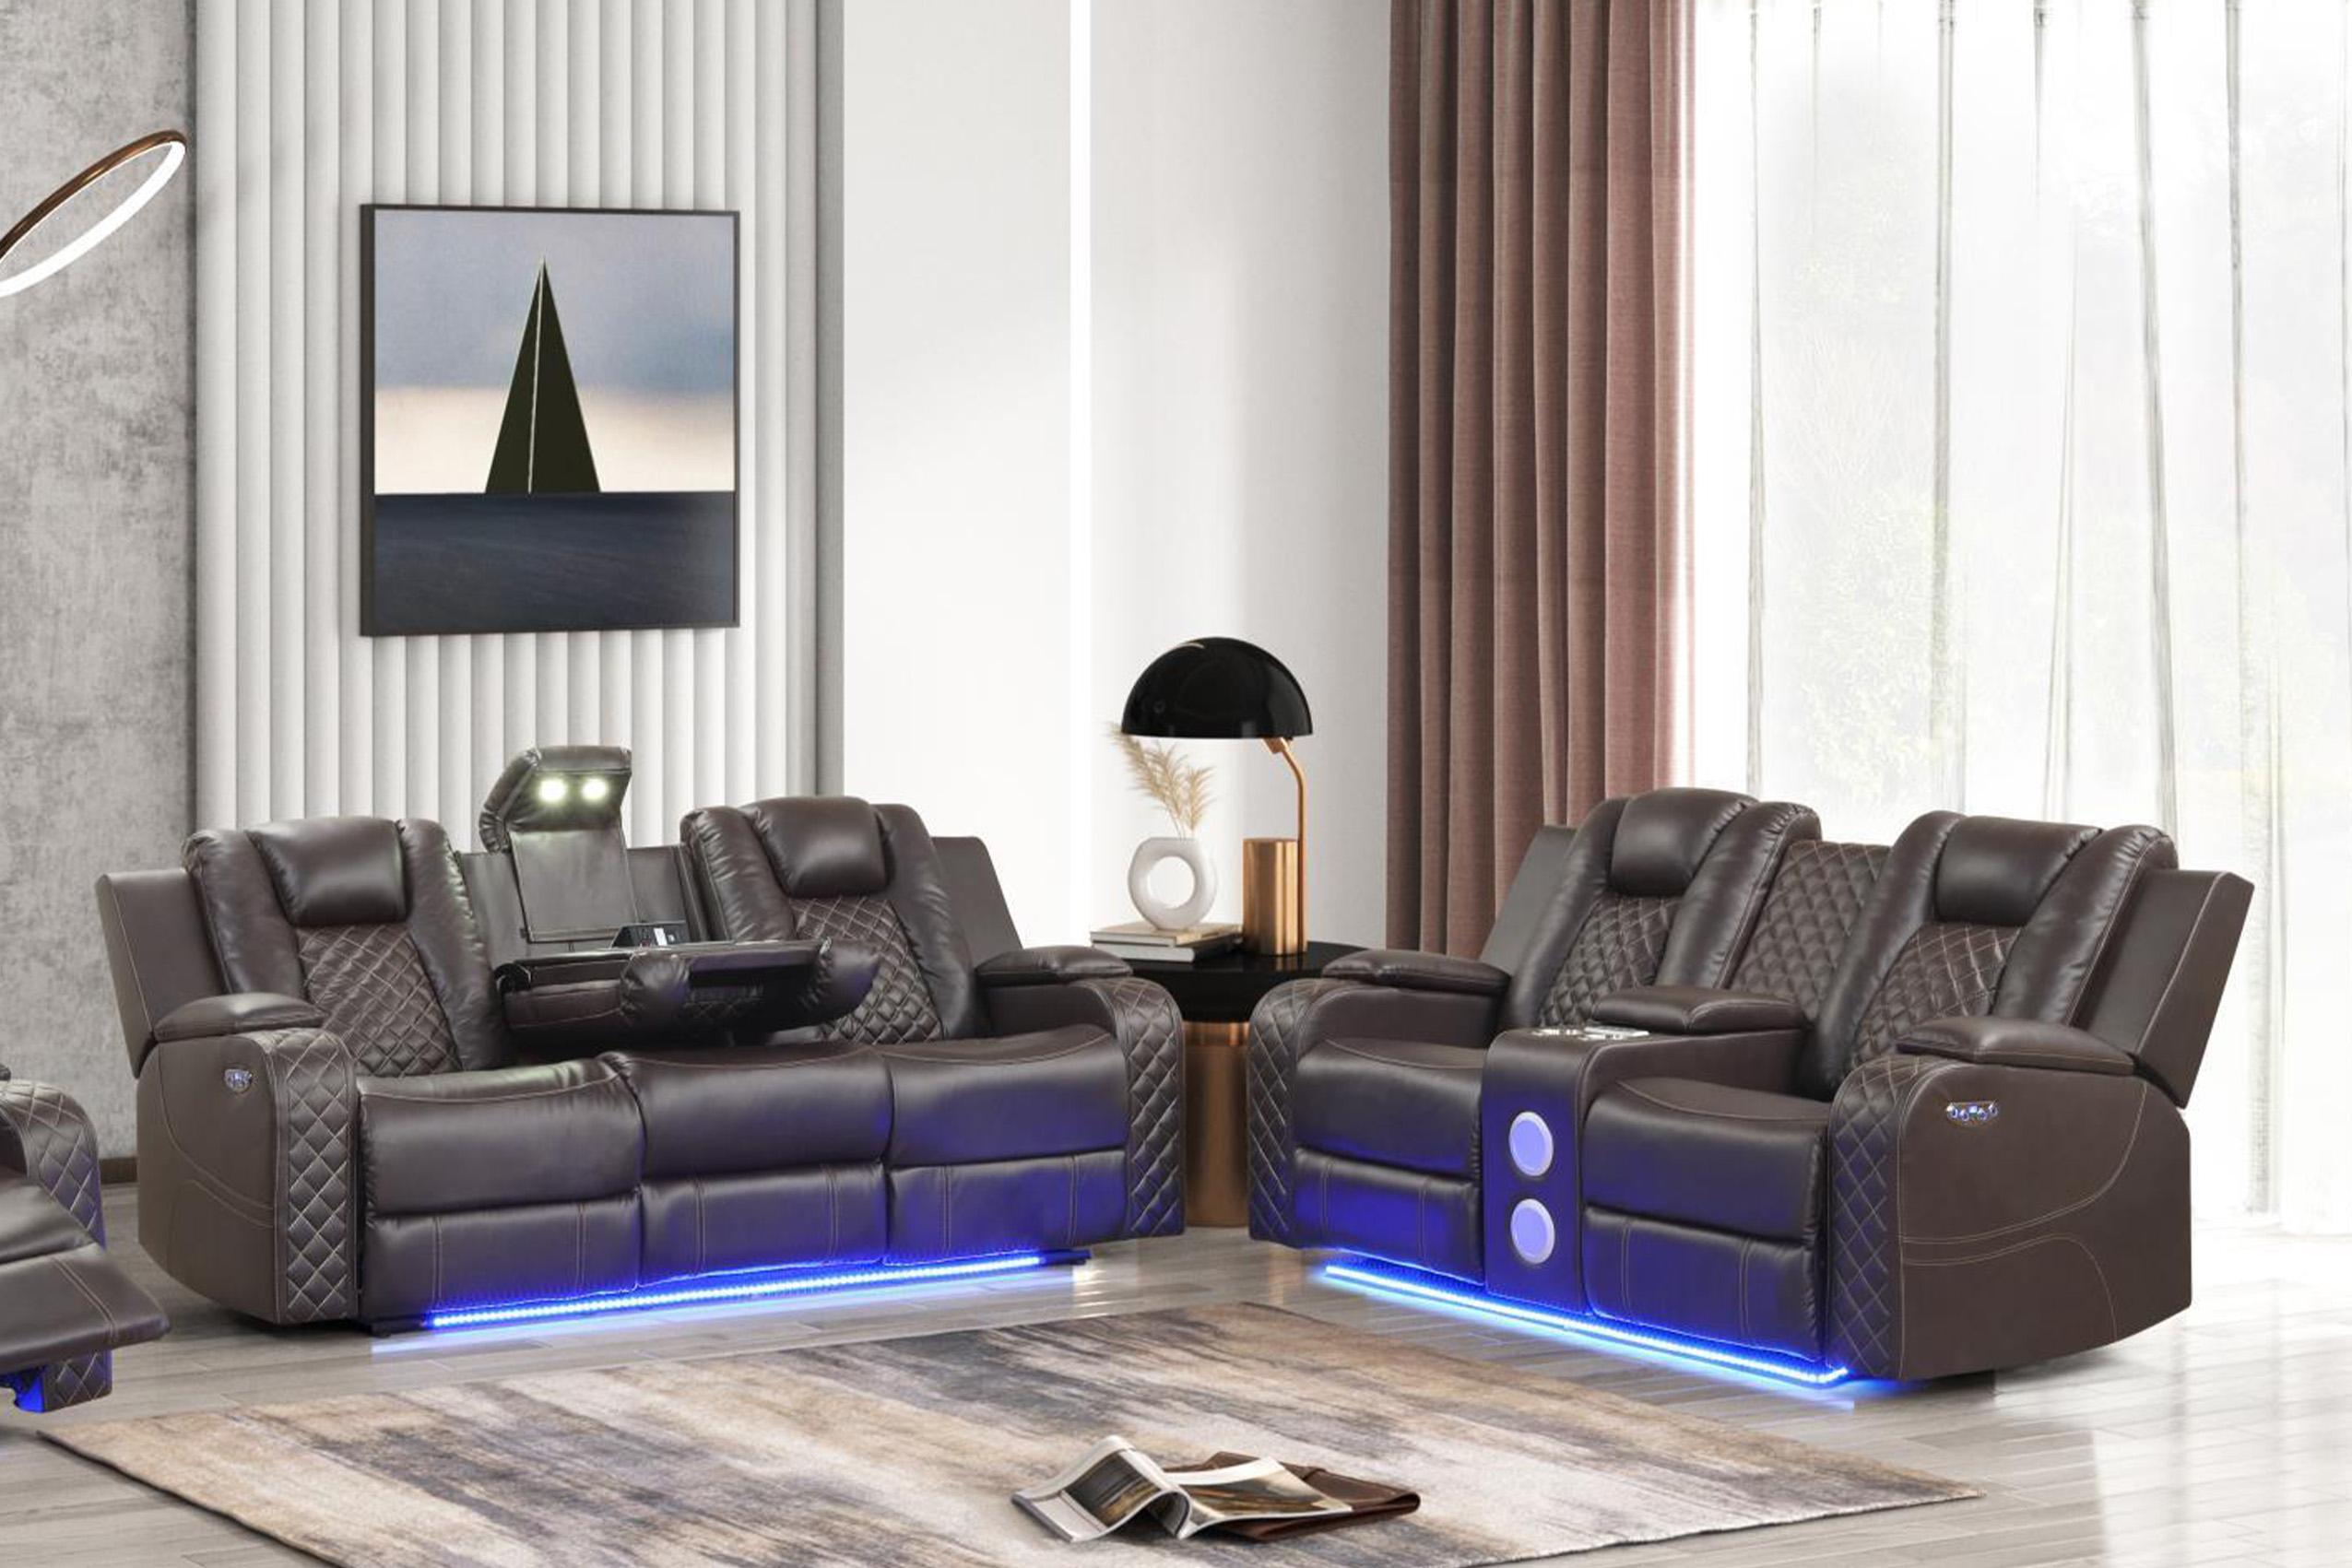 Contemporary, Modern Recliner Sofa Set BENZ Brown QB13425334-2PC in Brown Faux Leather